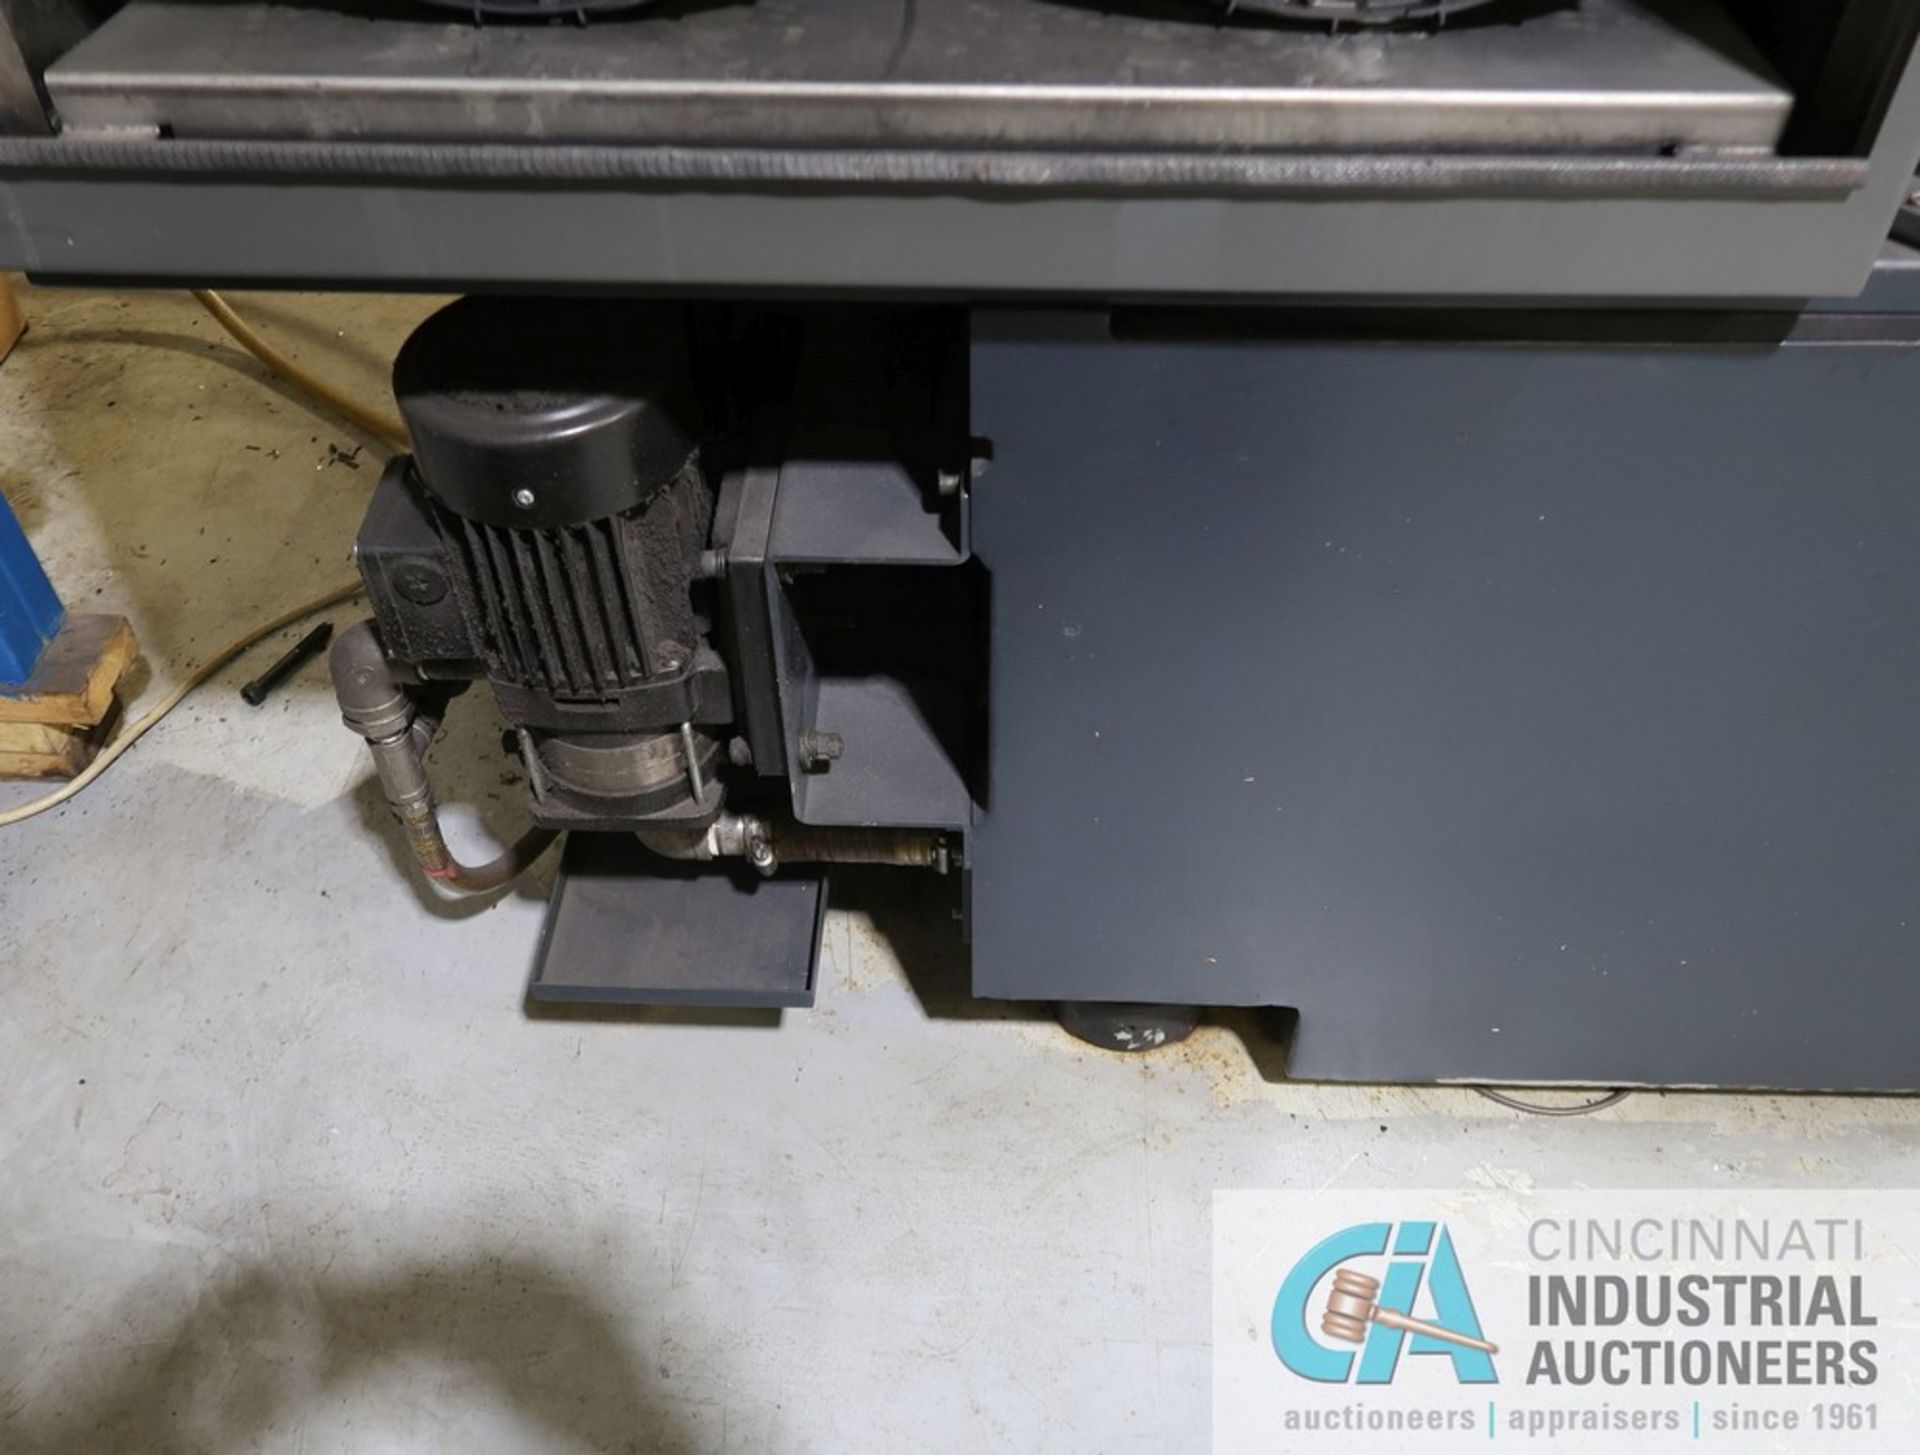 MAKINO MODEL DUO64 CNC WIRE EDM; S/N W130095 (NEW 2010) **OUT OF SERVICE** Repair quote in photos - Bild 14 aus 23